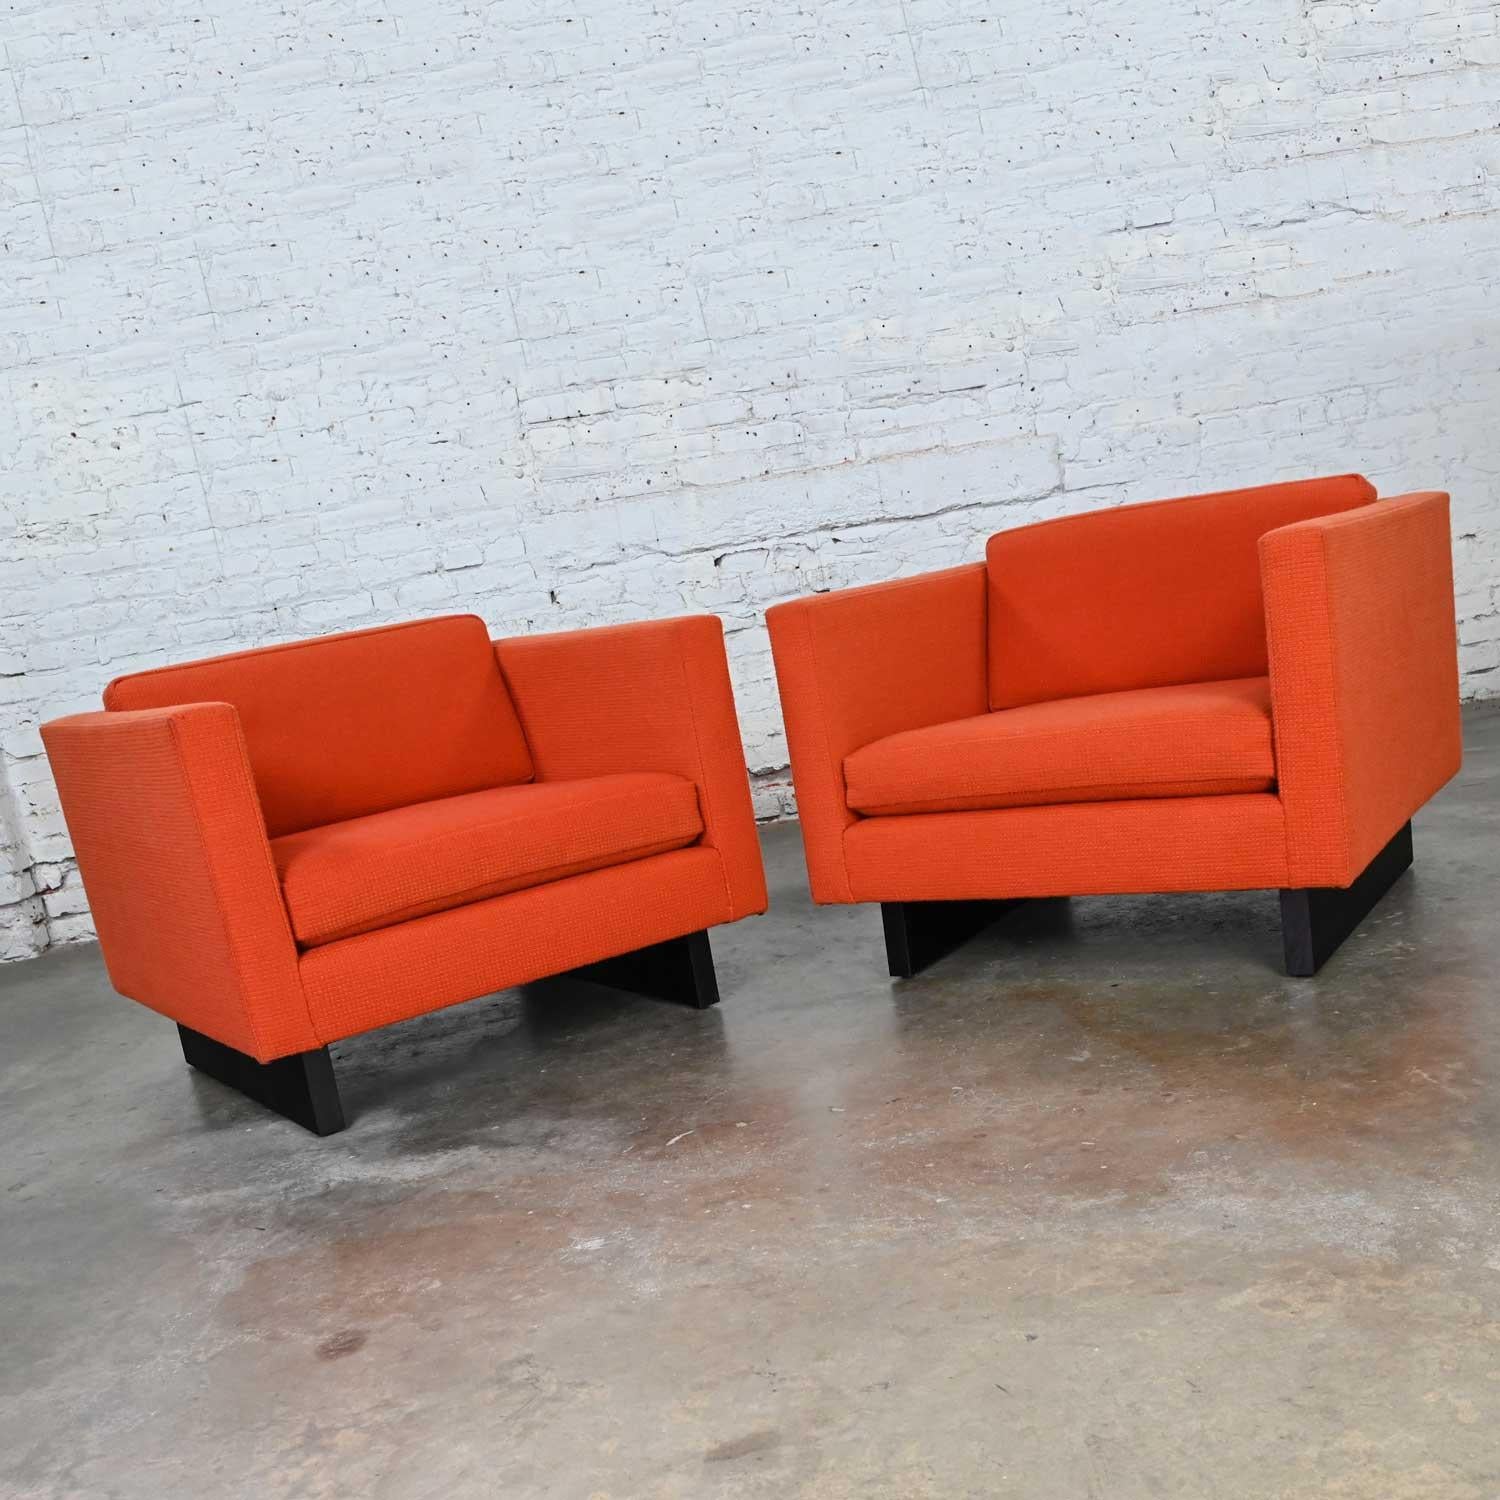 20th Century 1970s Mcm to Modern Harvey Probber Club Chairs Orange 1571 Tuxedo Sleigh Bases For Sale